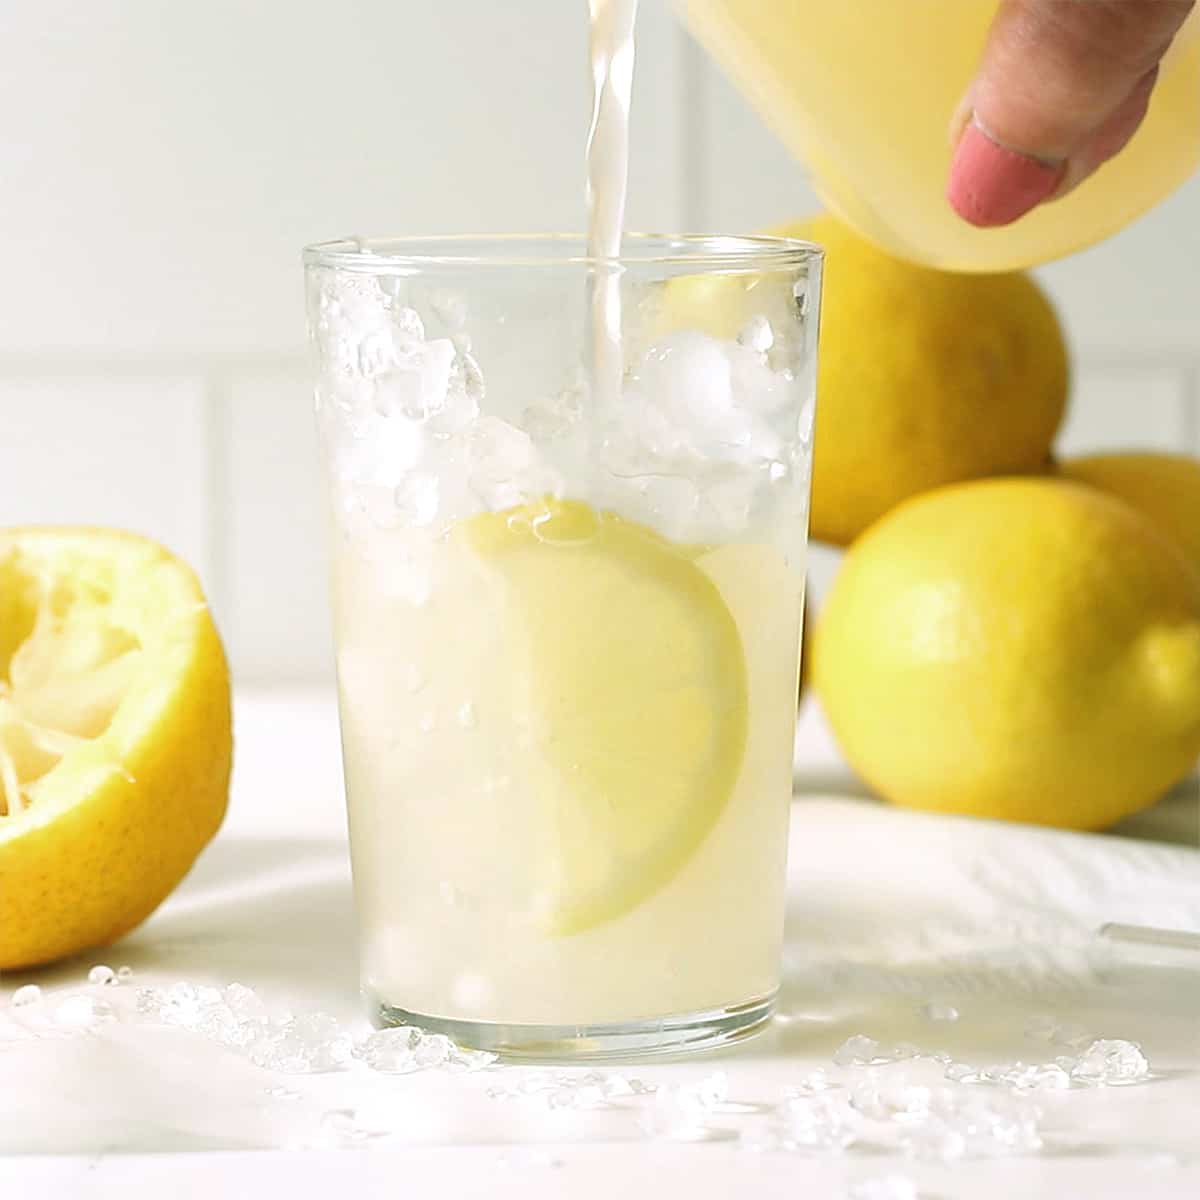 pouring lemonade into a glass of ice